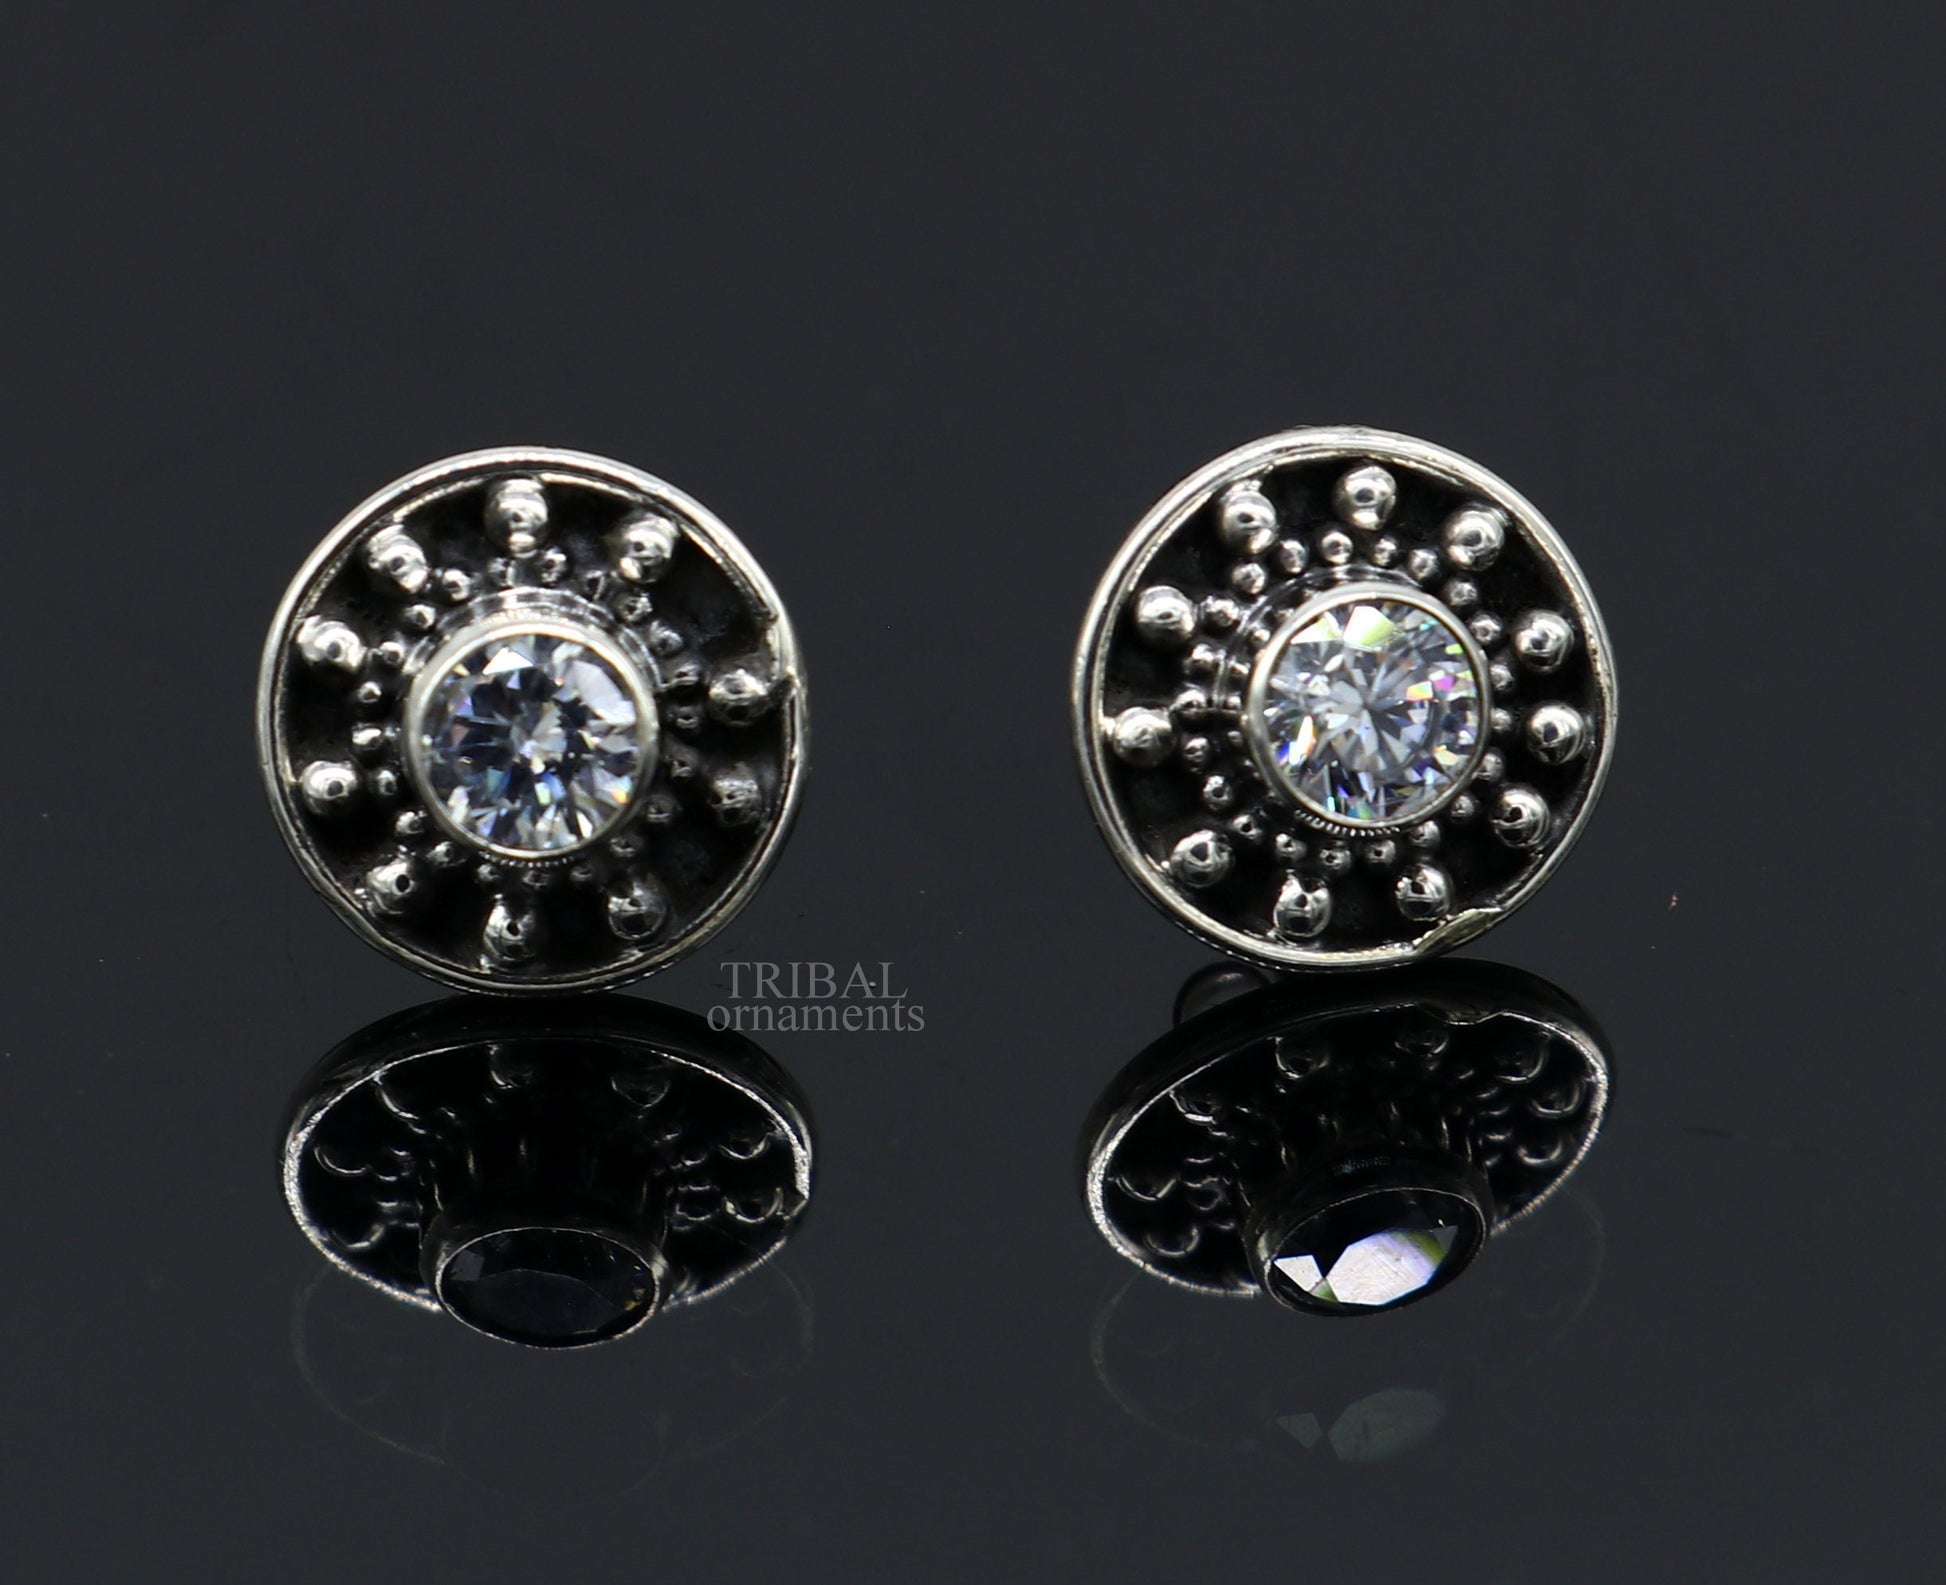 925 sterling handmade stylish vintage design single cz stone silver stud earring, best daily use vintage style jewelry from India ear1201 - TRIBAL ORNAMENTS